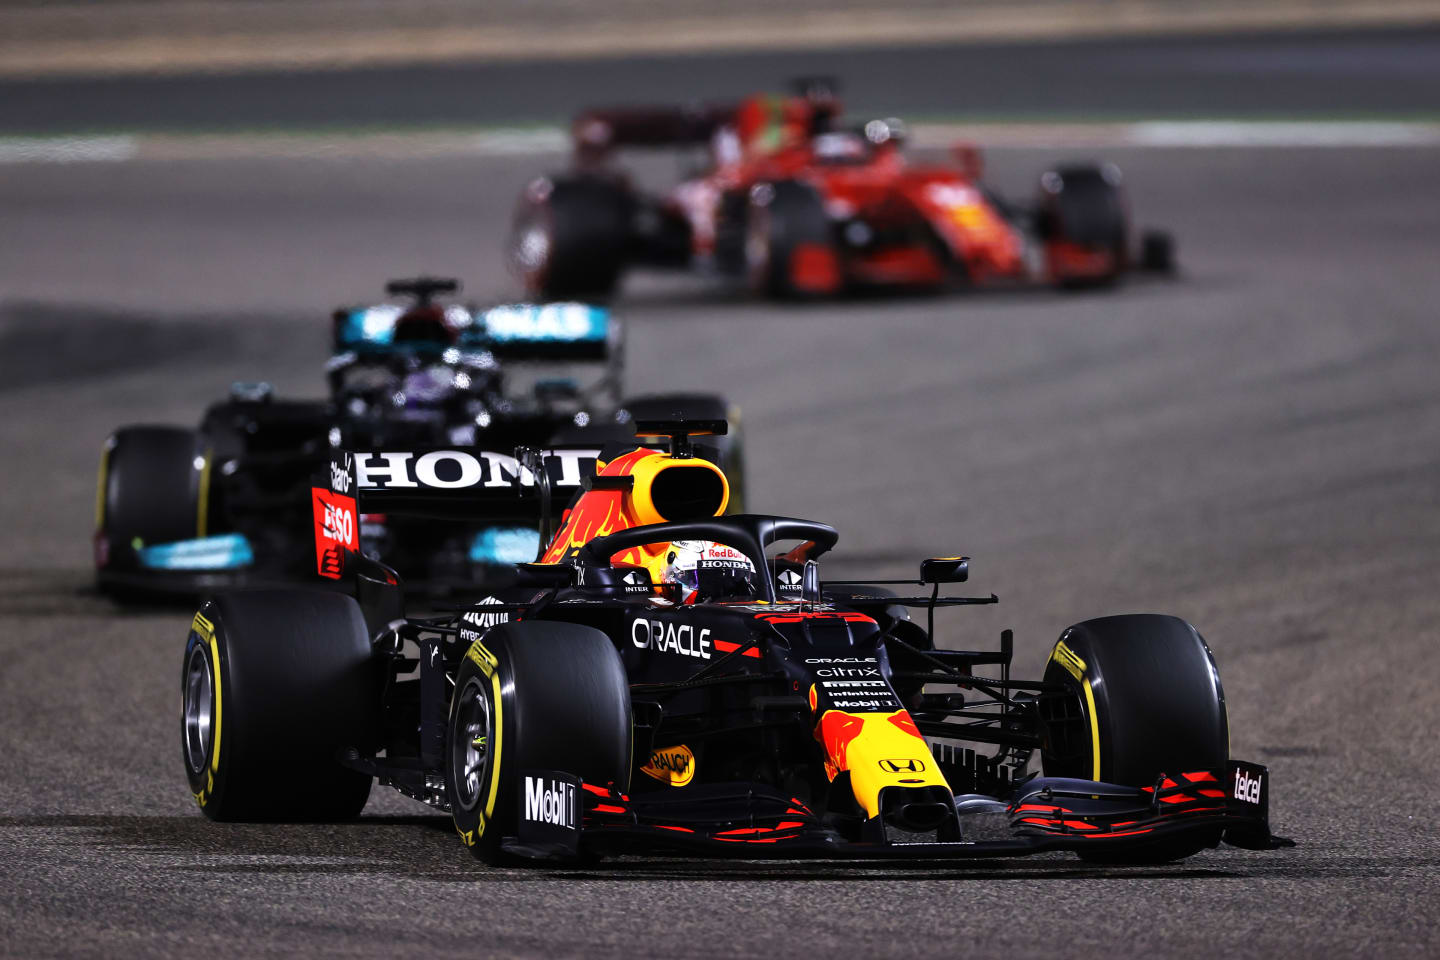 BAHRAIN, BAHRAIN - MARCH 28: Max Verstappen of the Netherlands driving the (33) Red Bull Racing